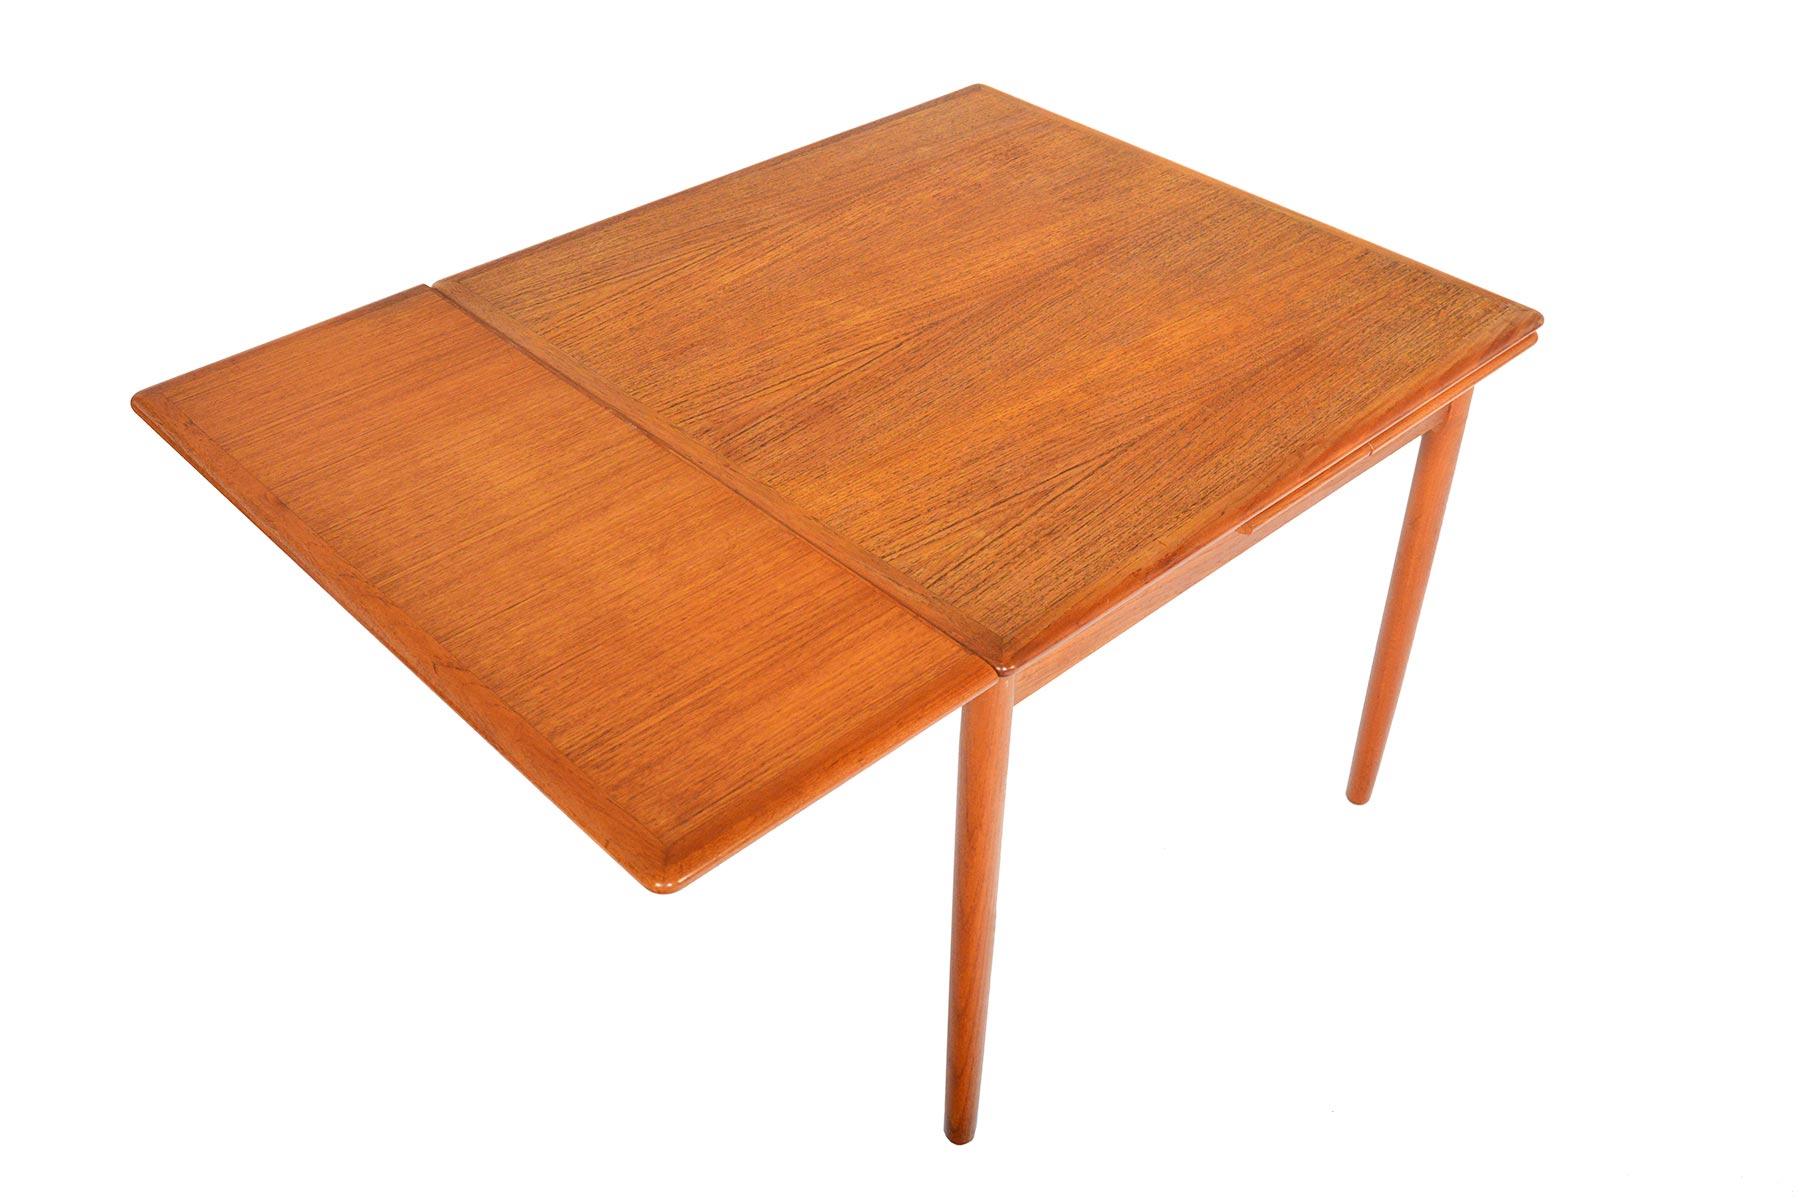 This fantastic Danish modern square draw-leaf dining table is crafted in teak. Perfect for smaller dining rooms or kitchens, this dining table offers a small footprint. When the two leaves are extended, the table nearly doubles in size. Great for